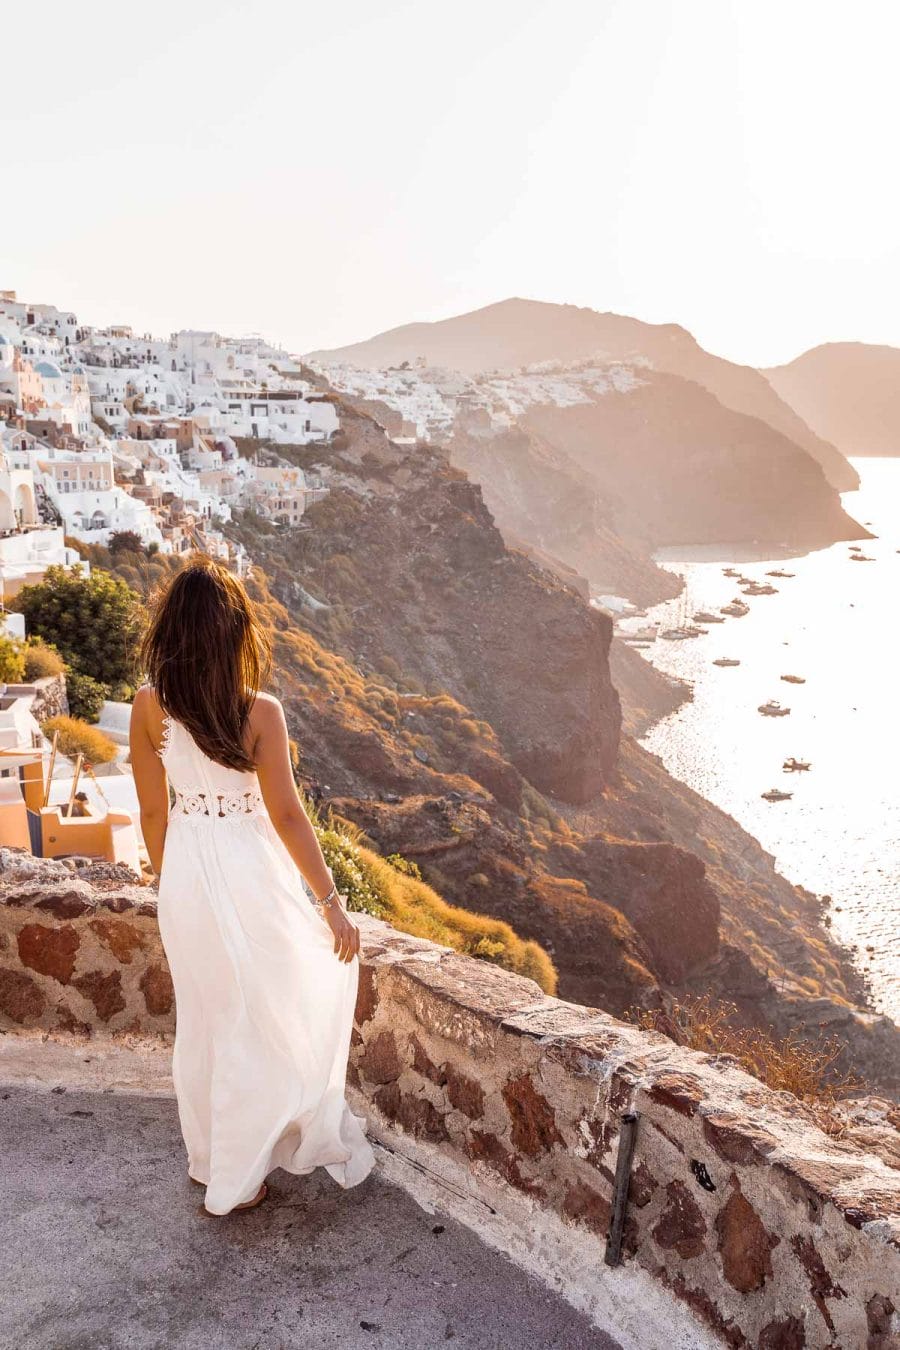 Girl in a white dress standing in the Oia Castle, looking at the view of the caldera at sunrise